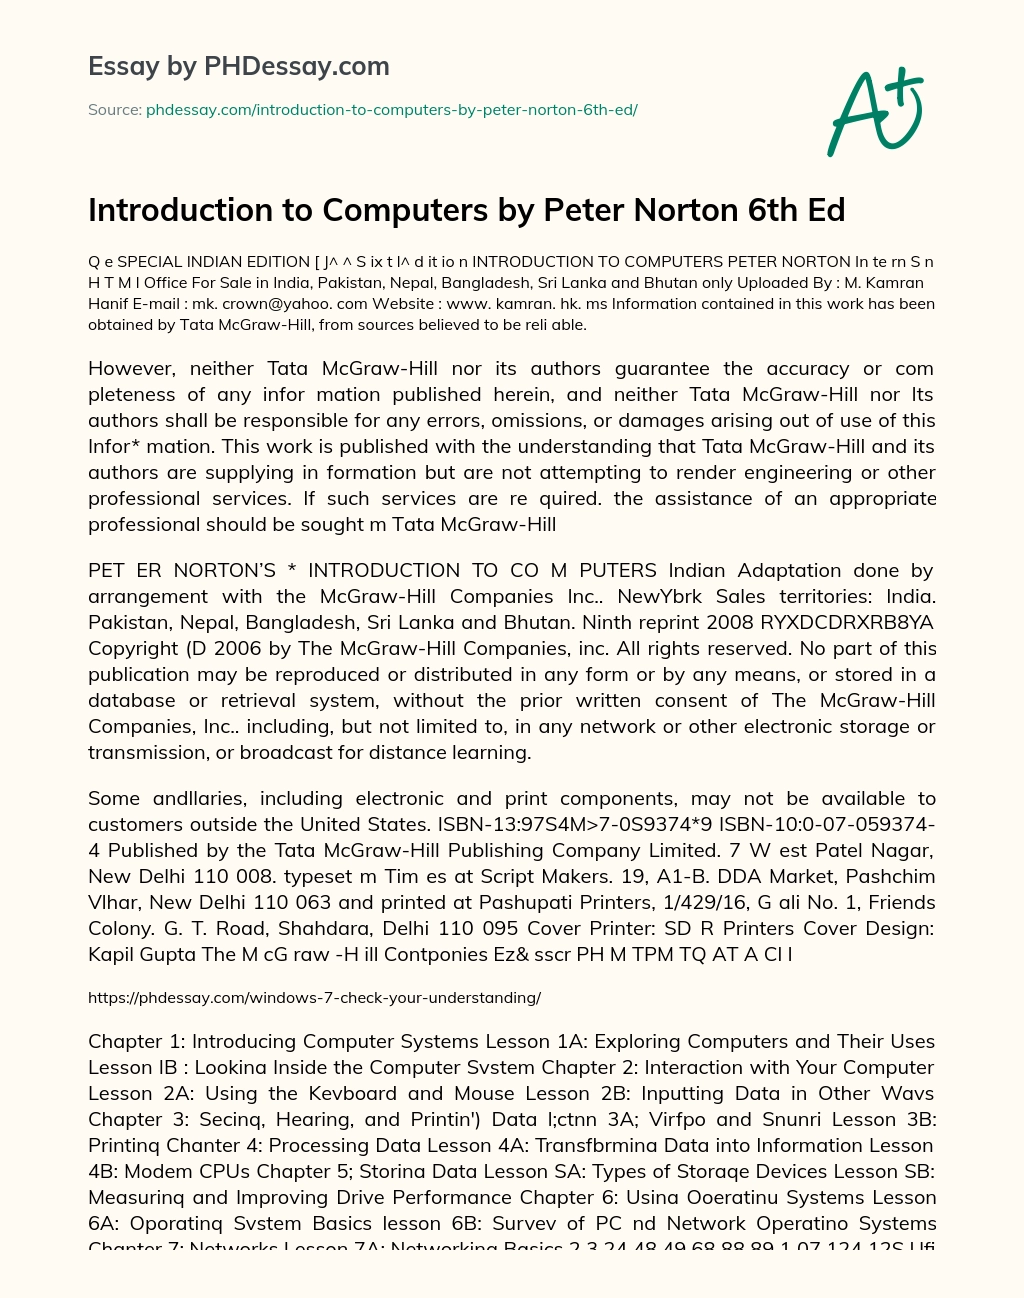 Introduction to Computers by Peter Norton 6th Ed essay